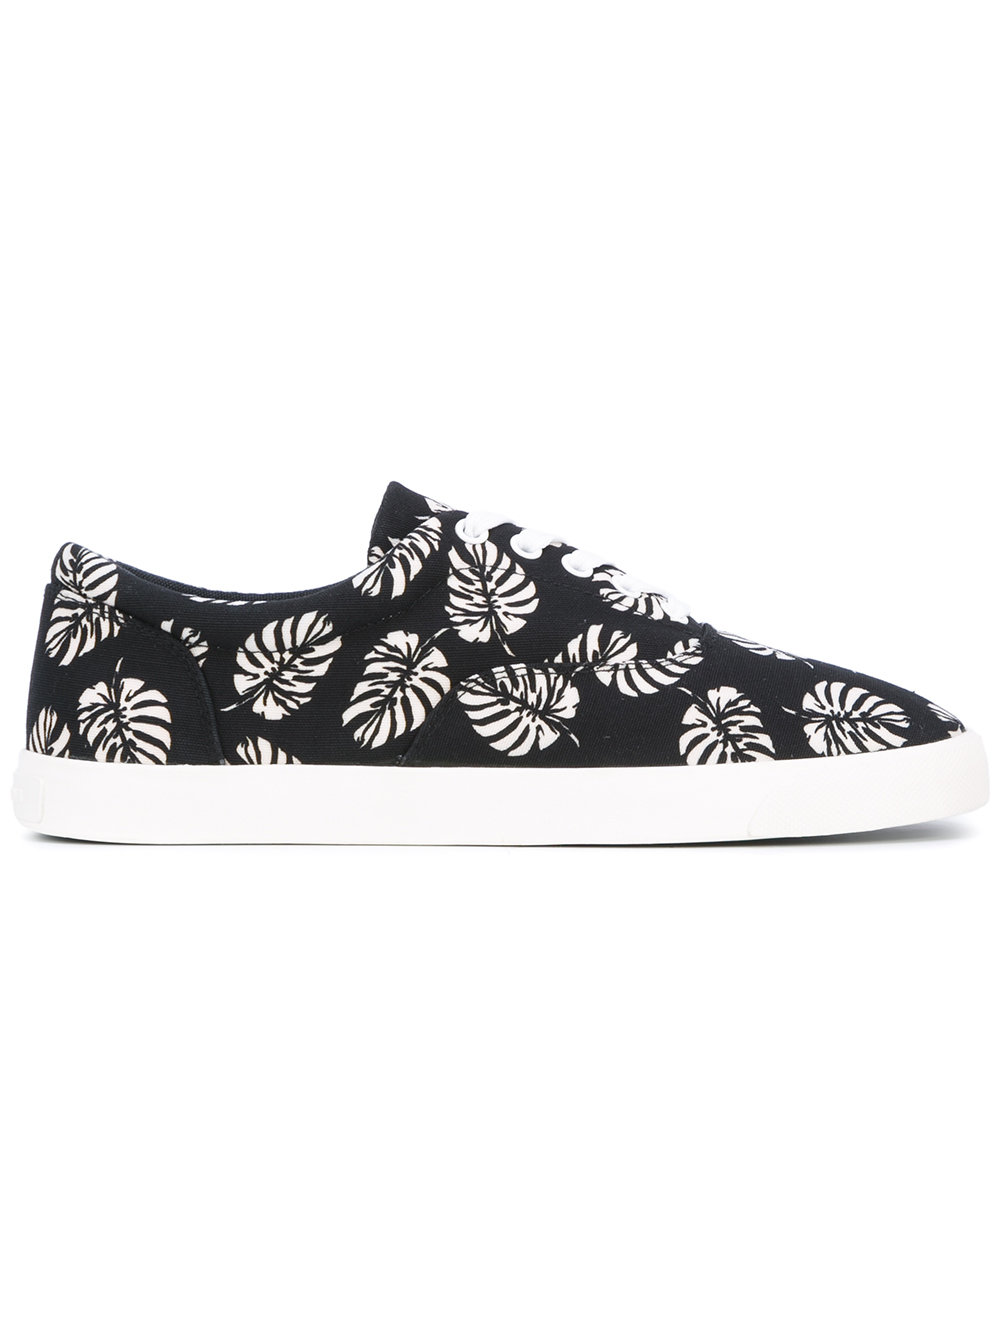 Preferably Printed: Dolce and Gabbana Jazz Club Print Sneakers ...